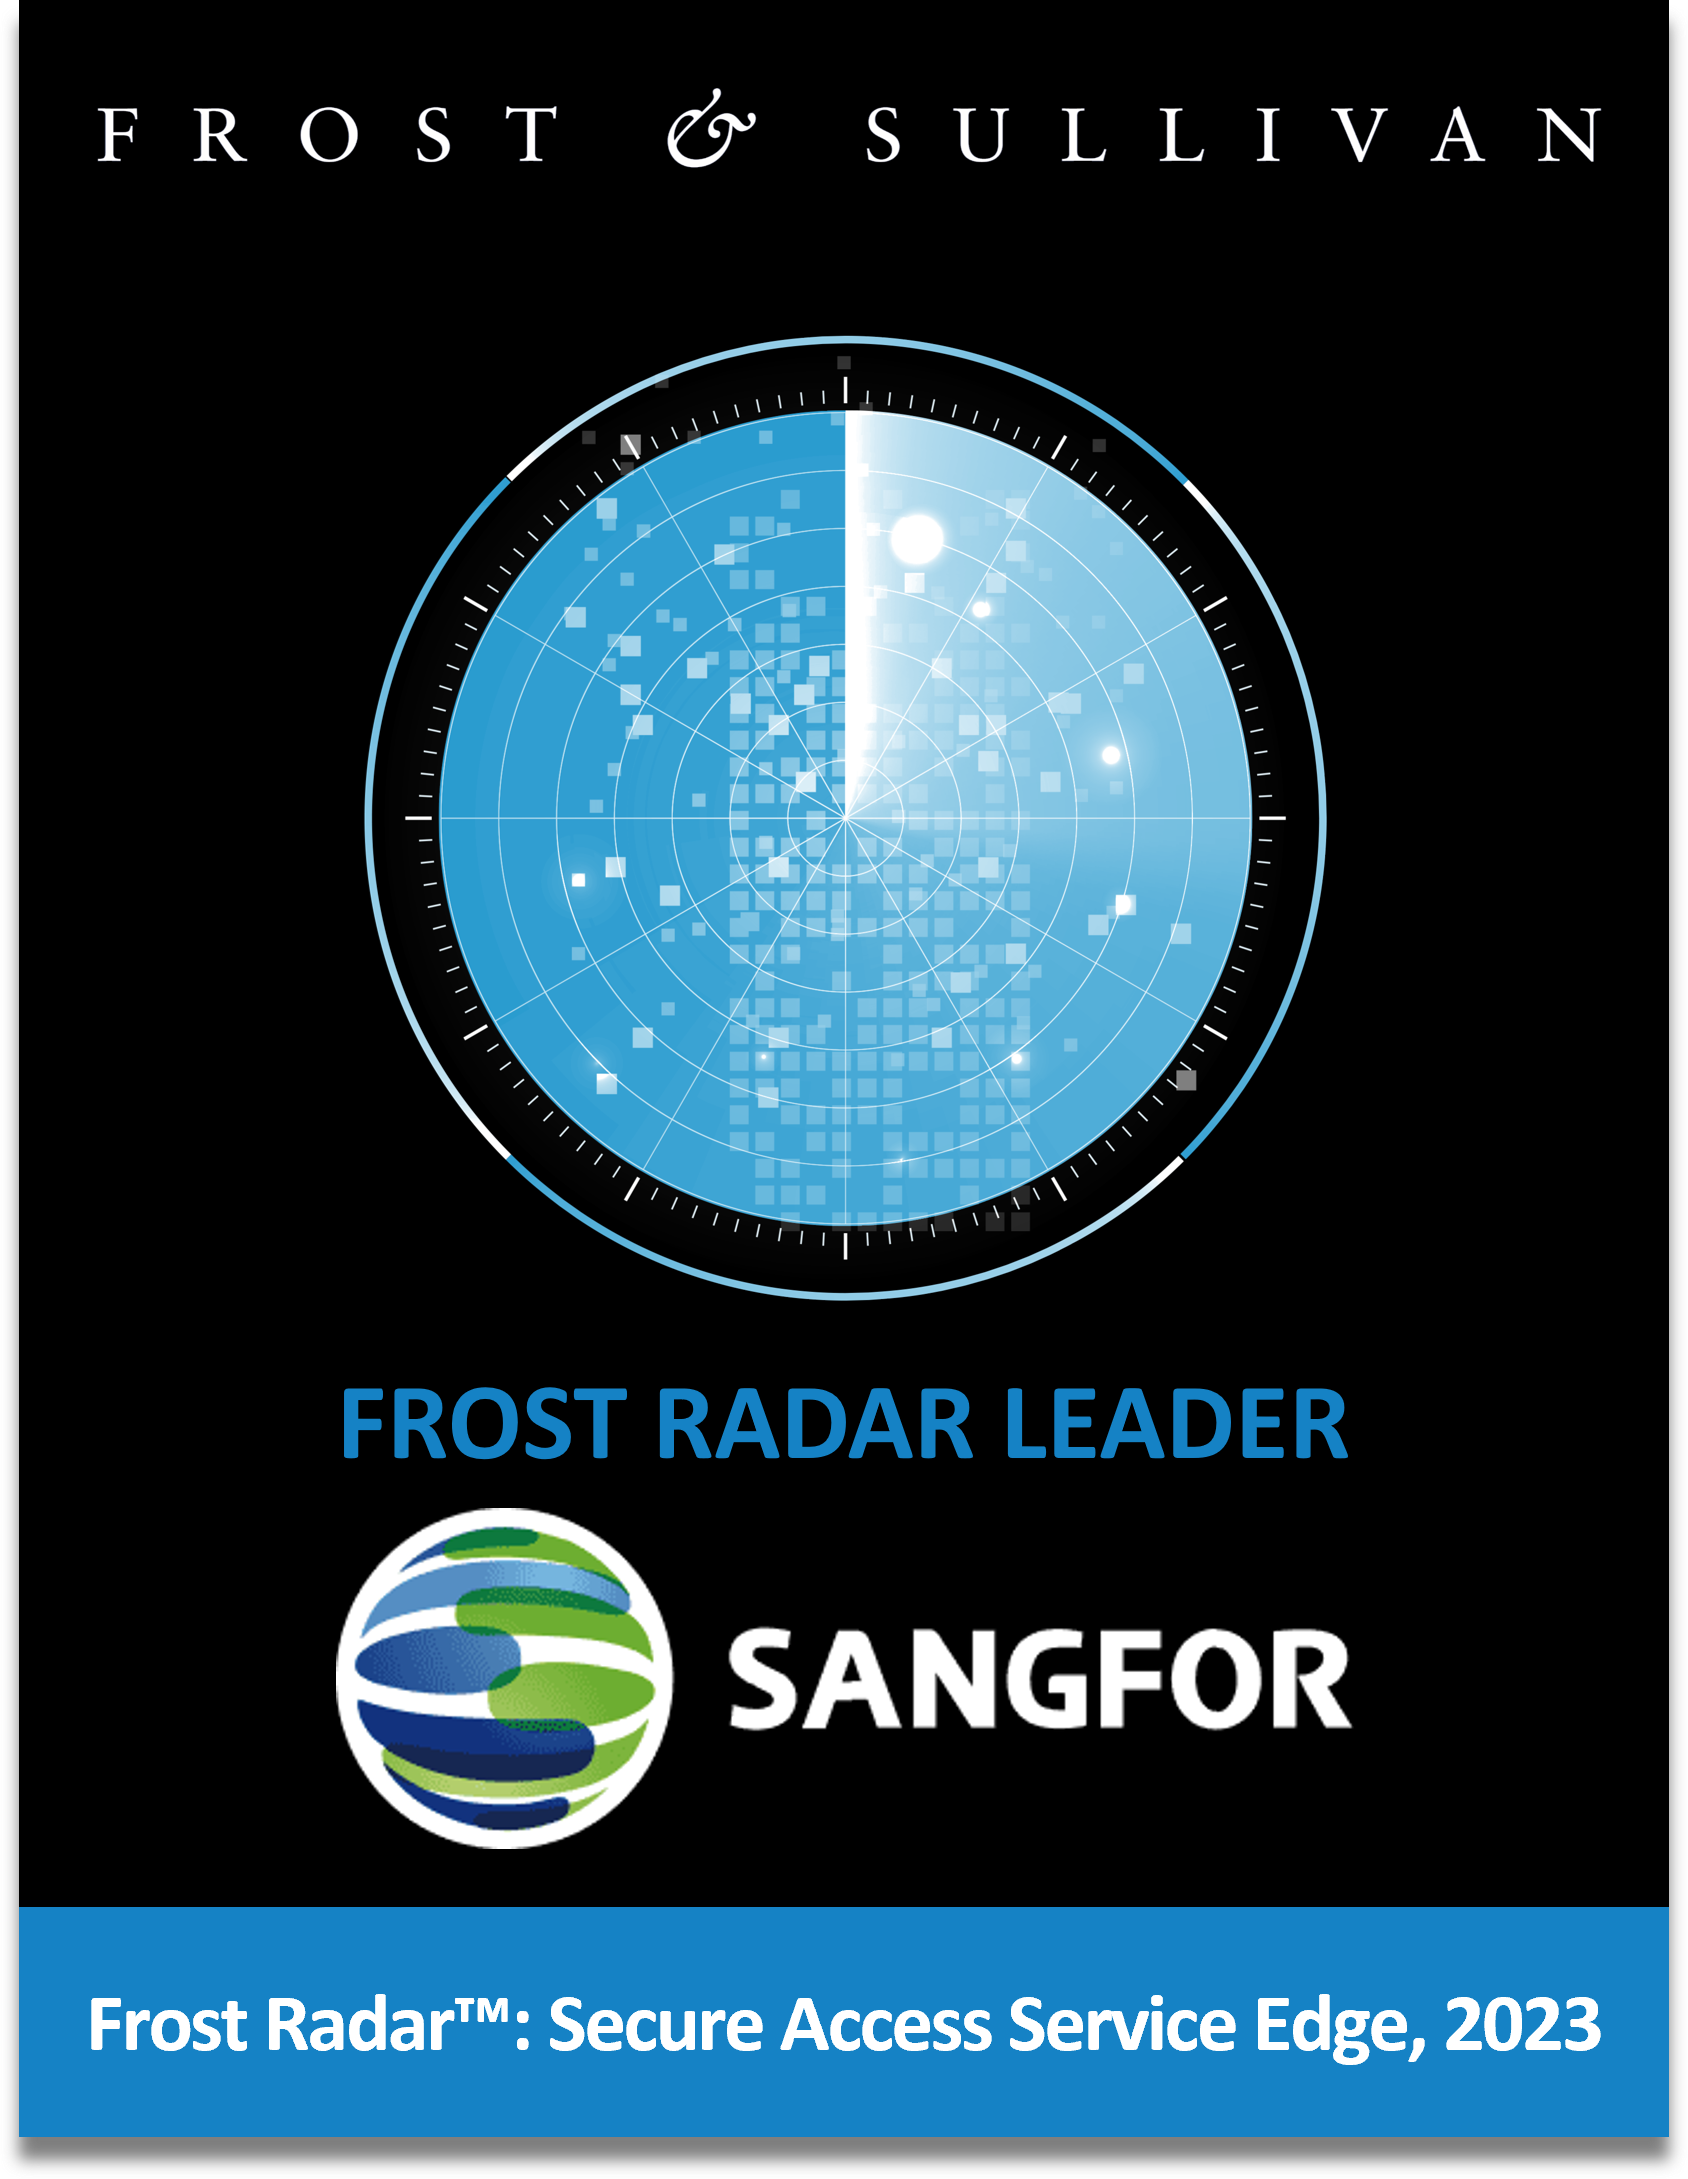 The Impressive Growth of Sangfor’s Access Secure (SASE): A Frost & Sullivan Perspective